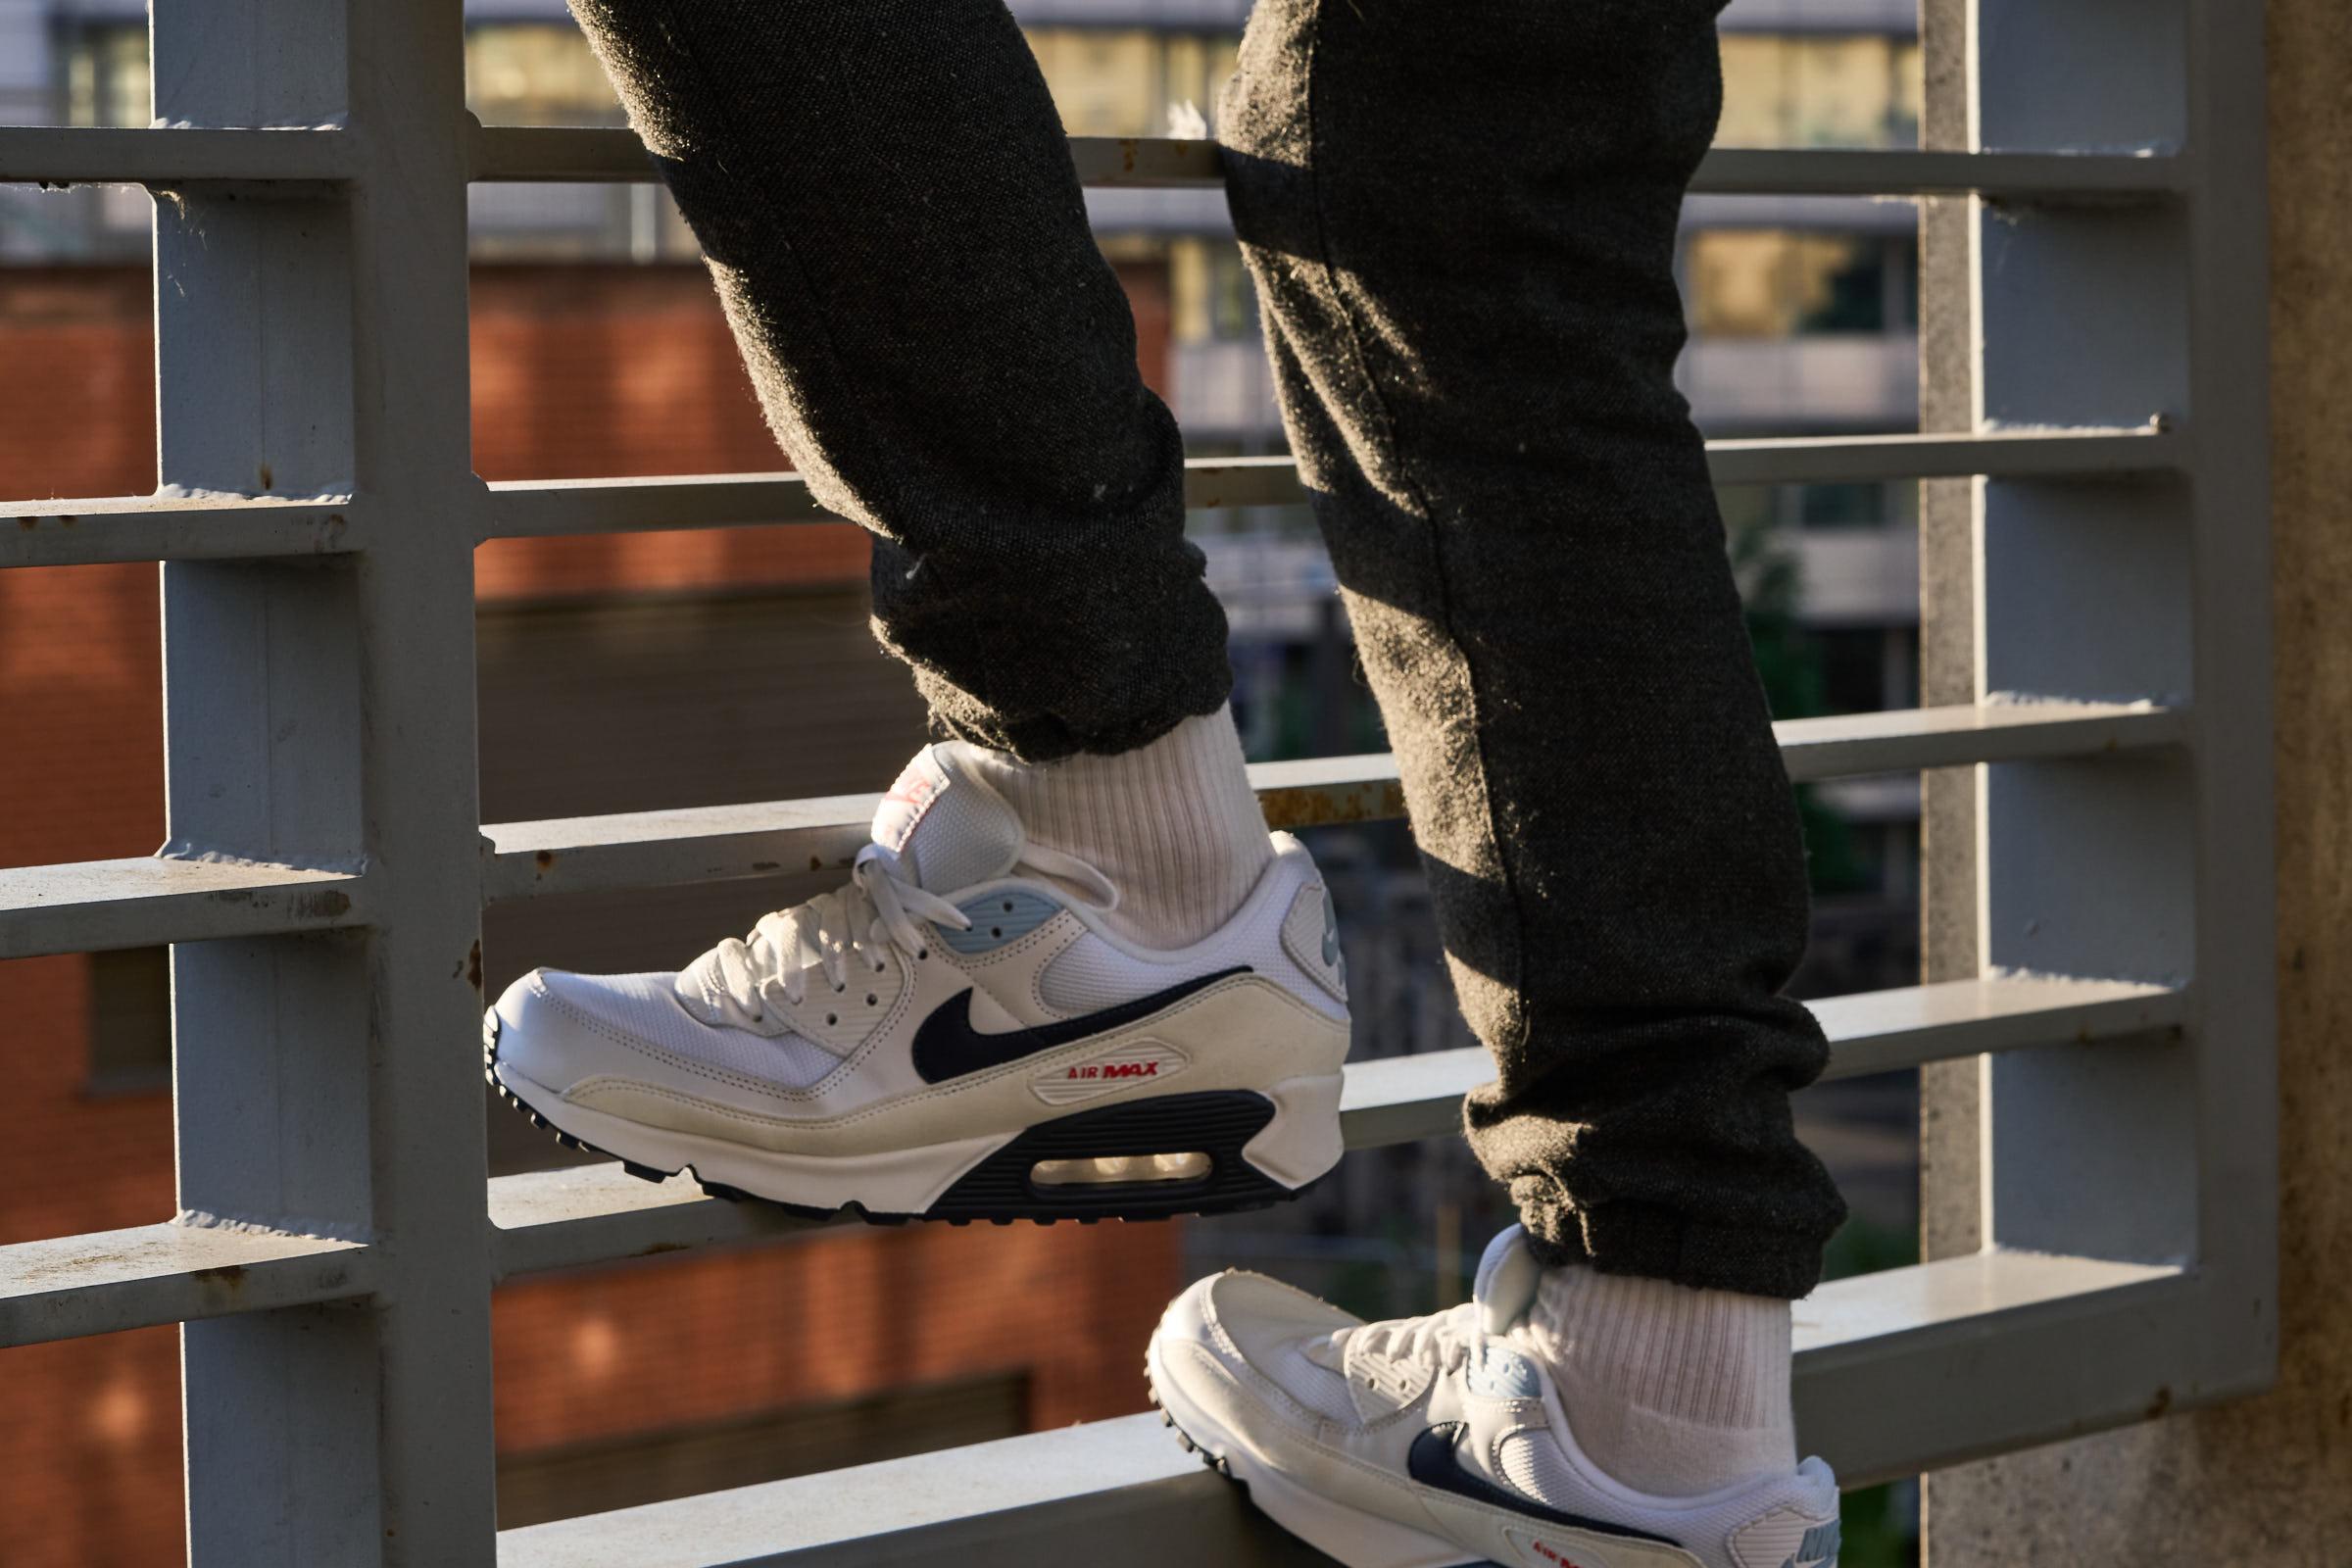 HealthdesignShops | Facts, Comparison, mens nike nike grey running lunarglide shoes 2020 silver sale Review, and shoes purple